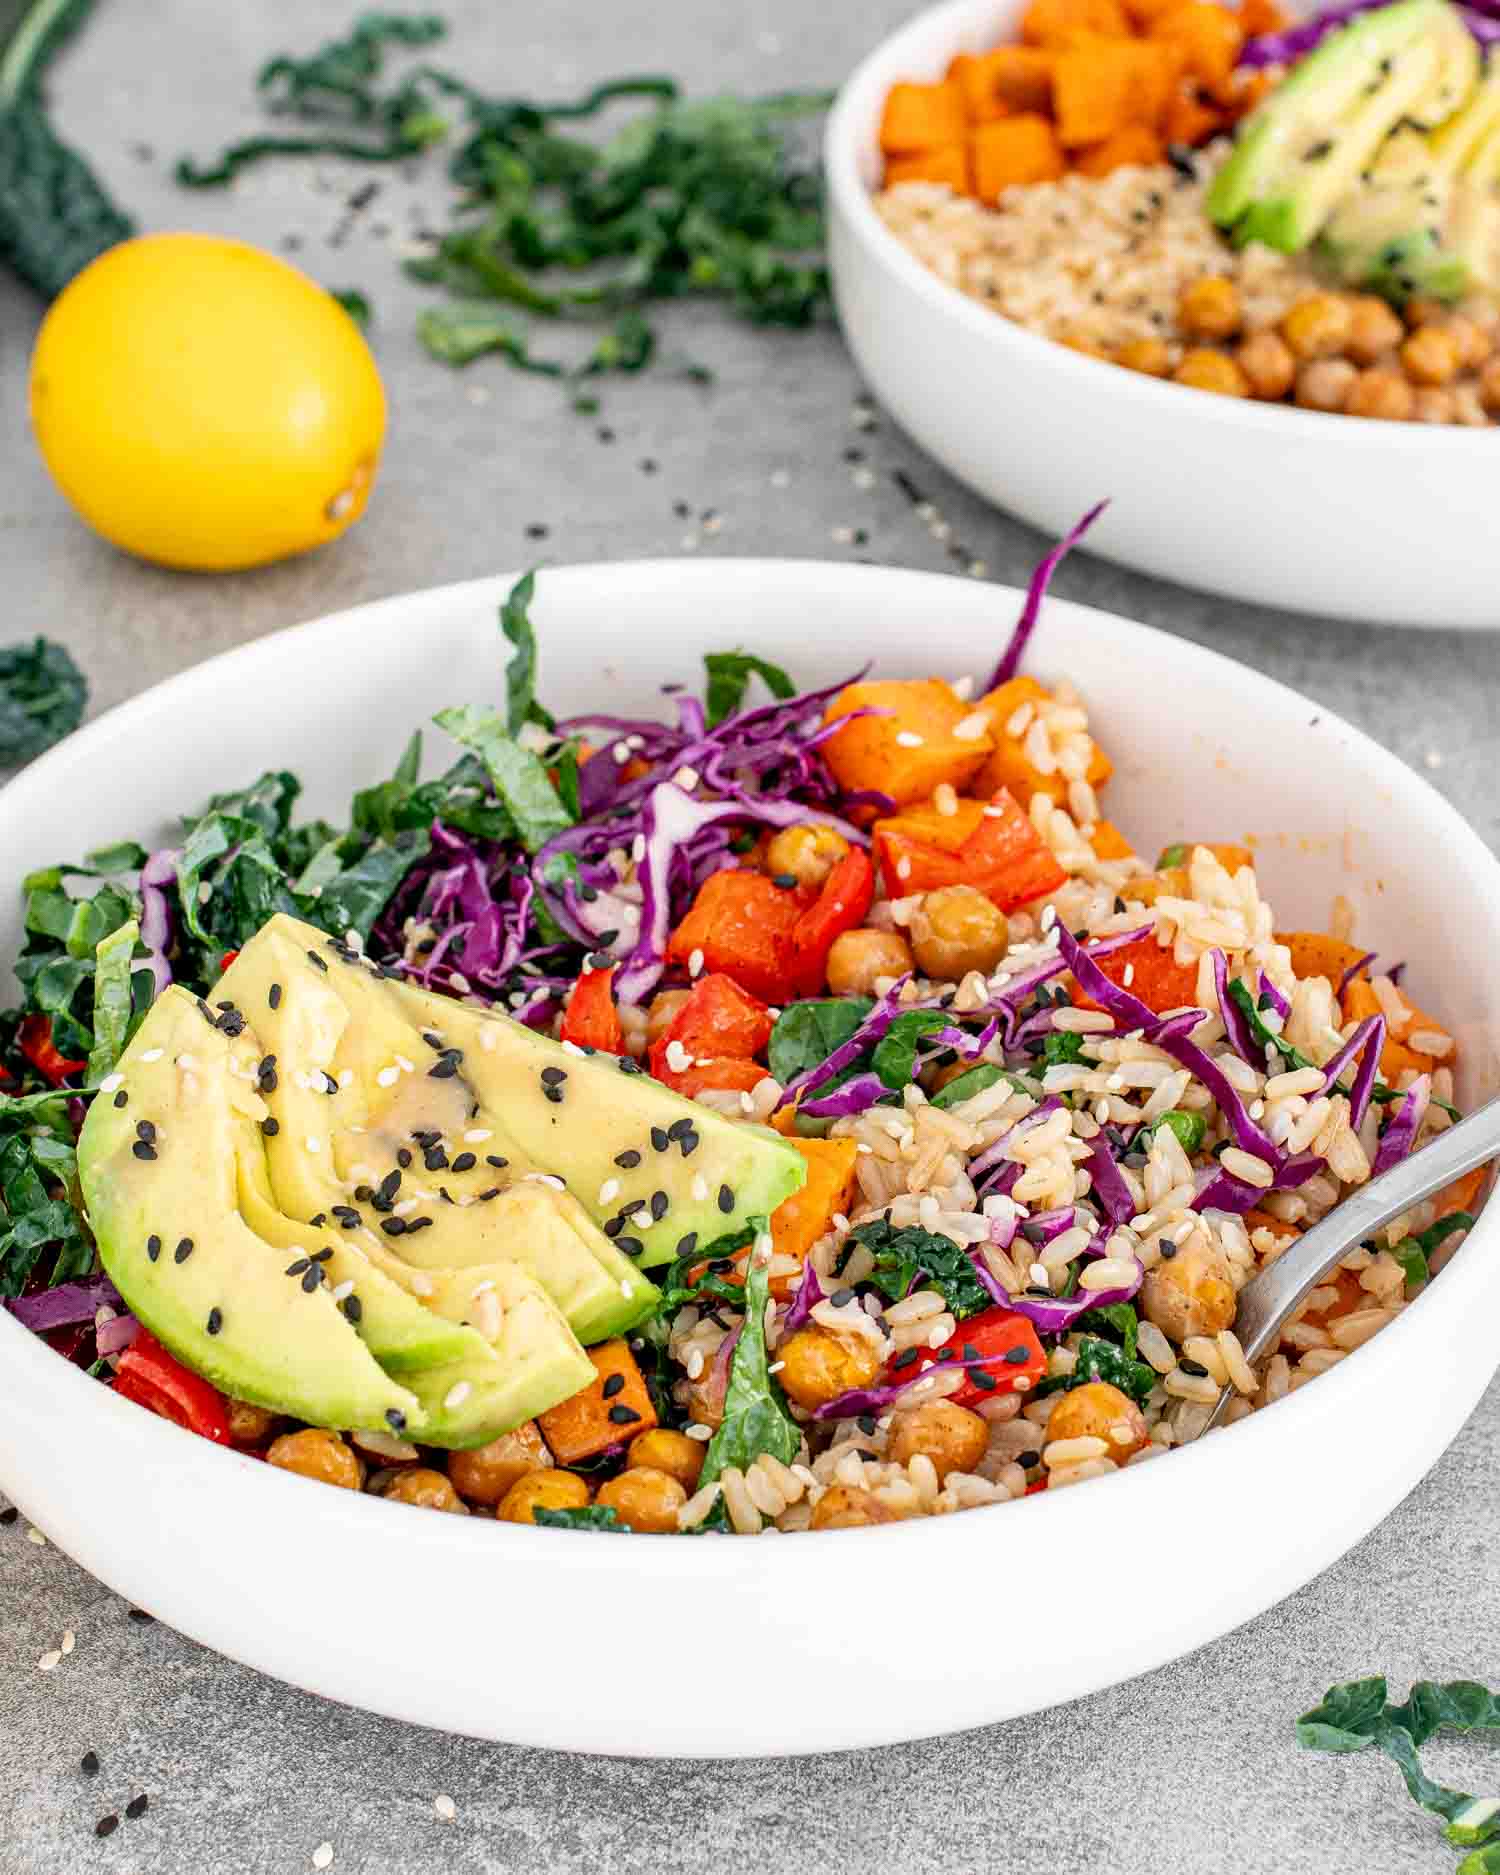 A colorful Buddha bowl with avocado, chickpeas, rice, and mixed vegetables, garnished with black sesame seeds.